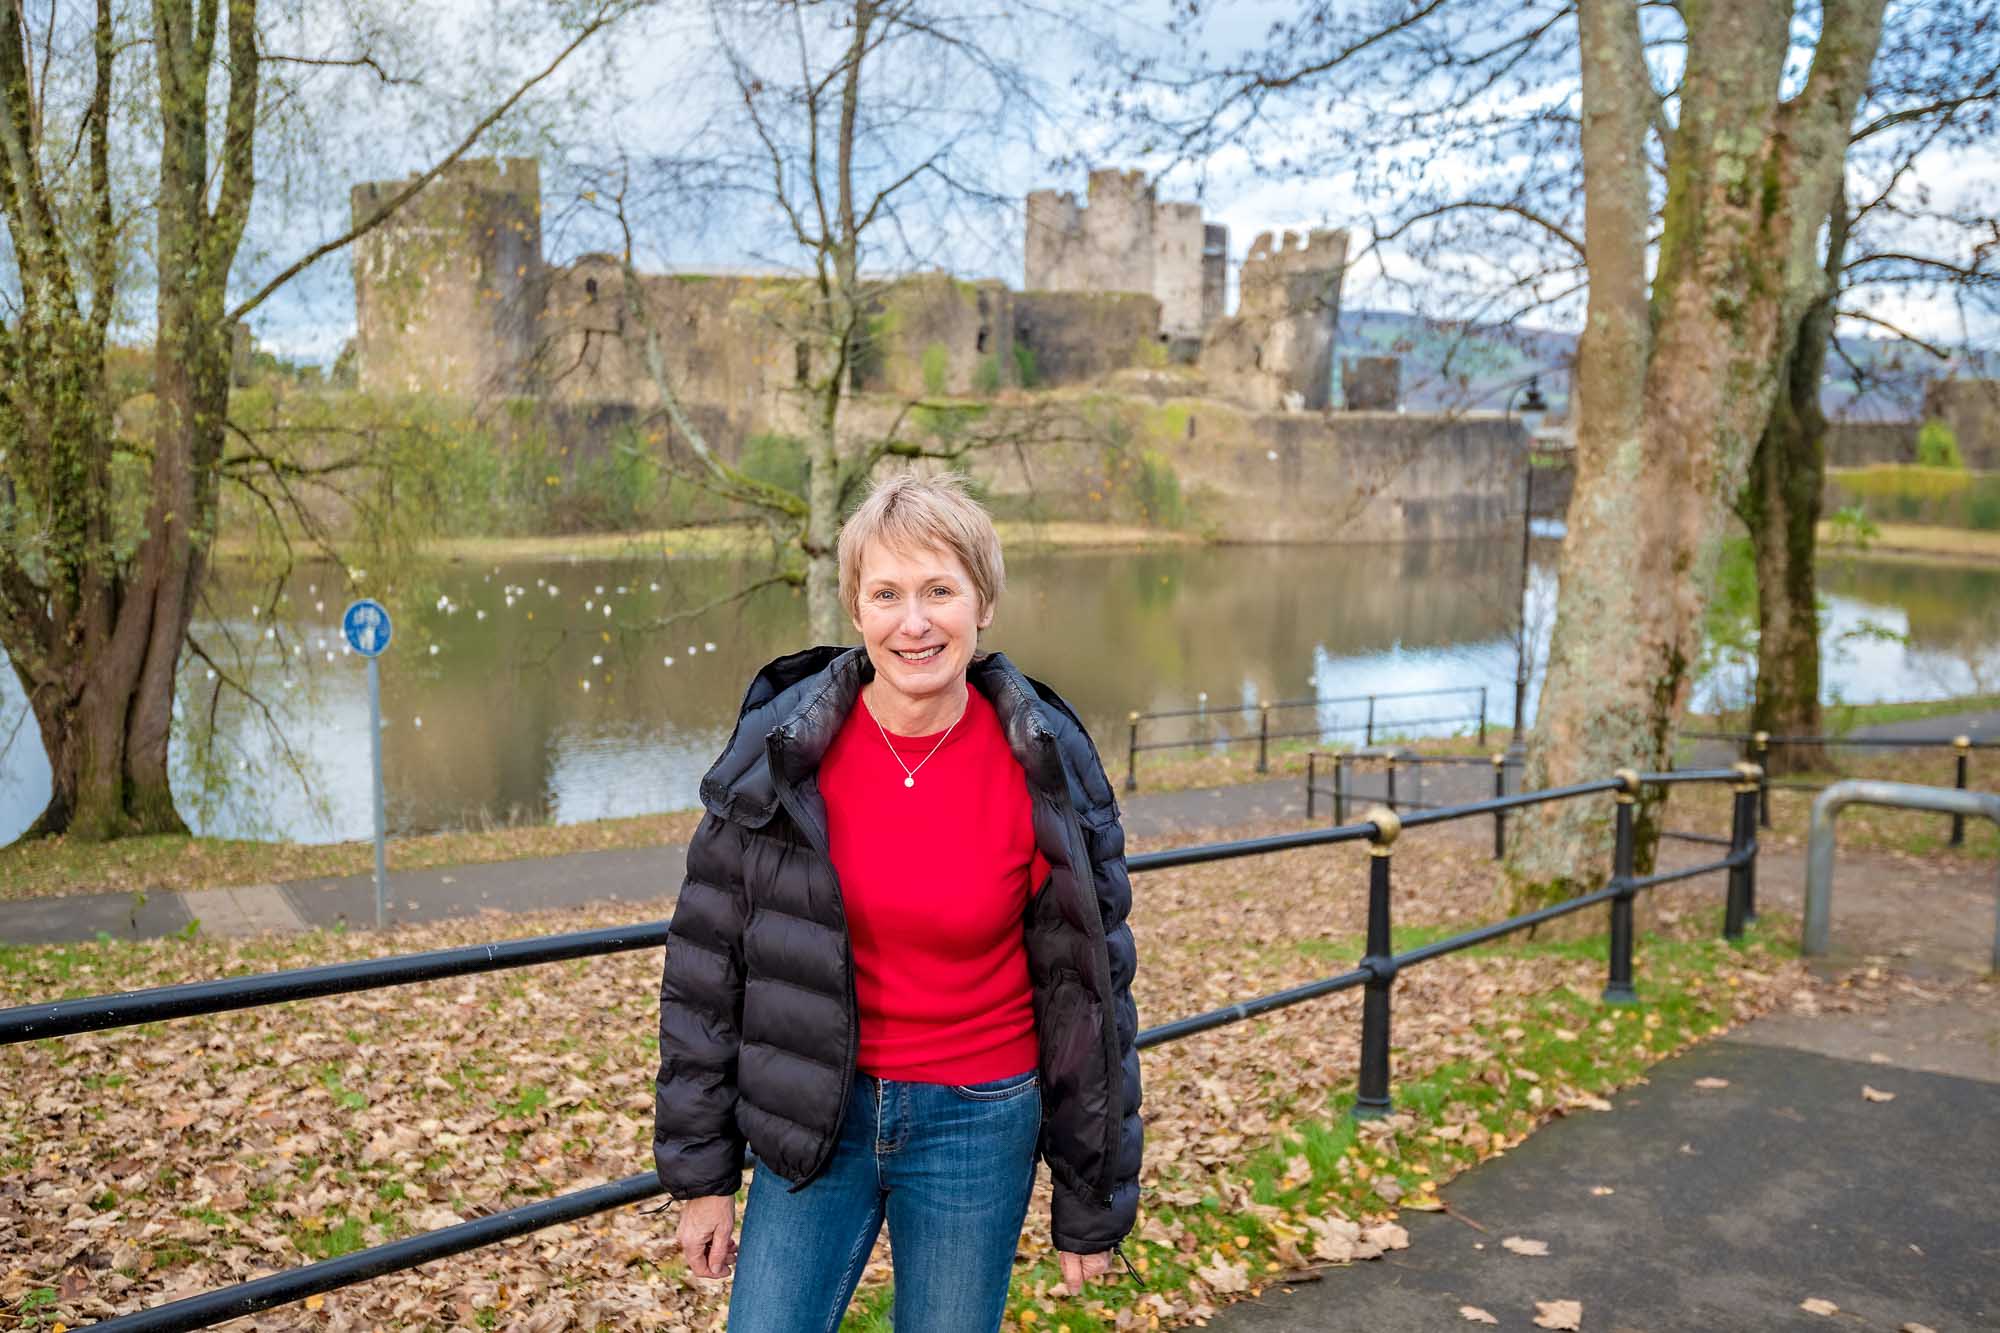 Smiling lady with Caerphilly Castle in the background in Autumn